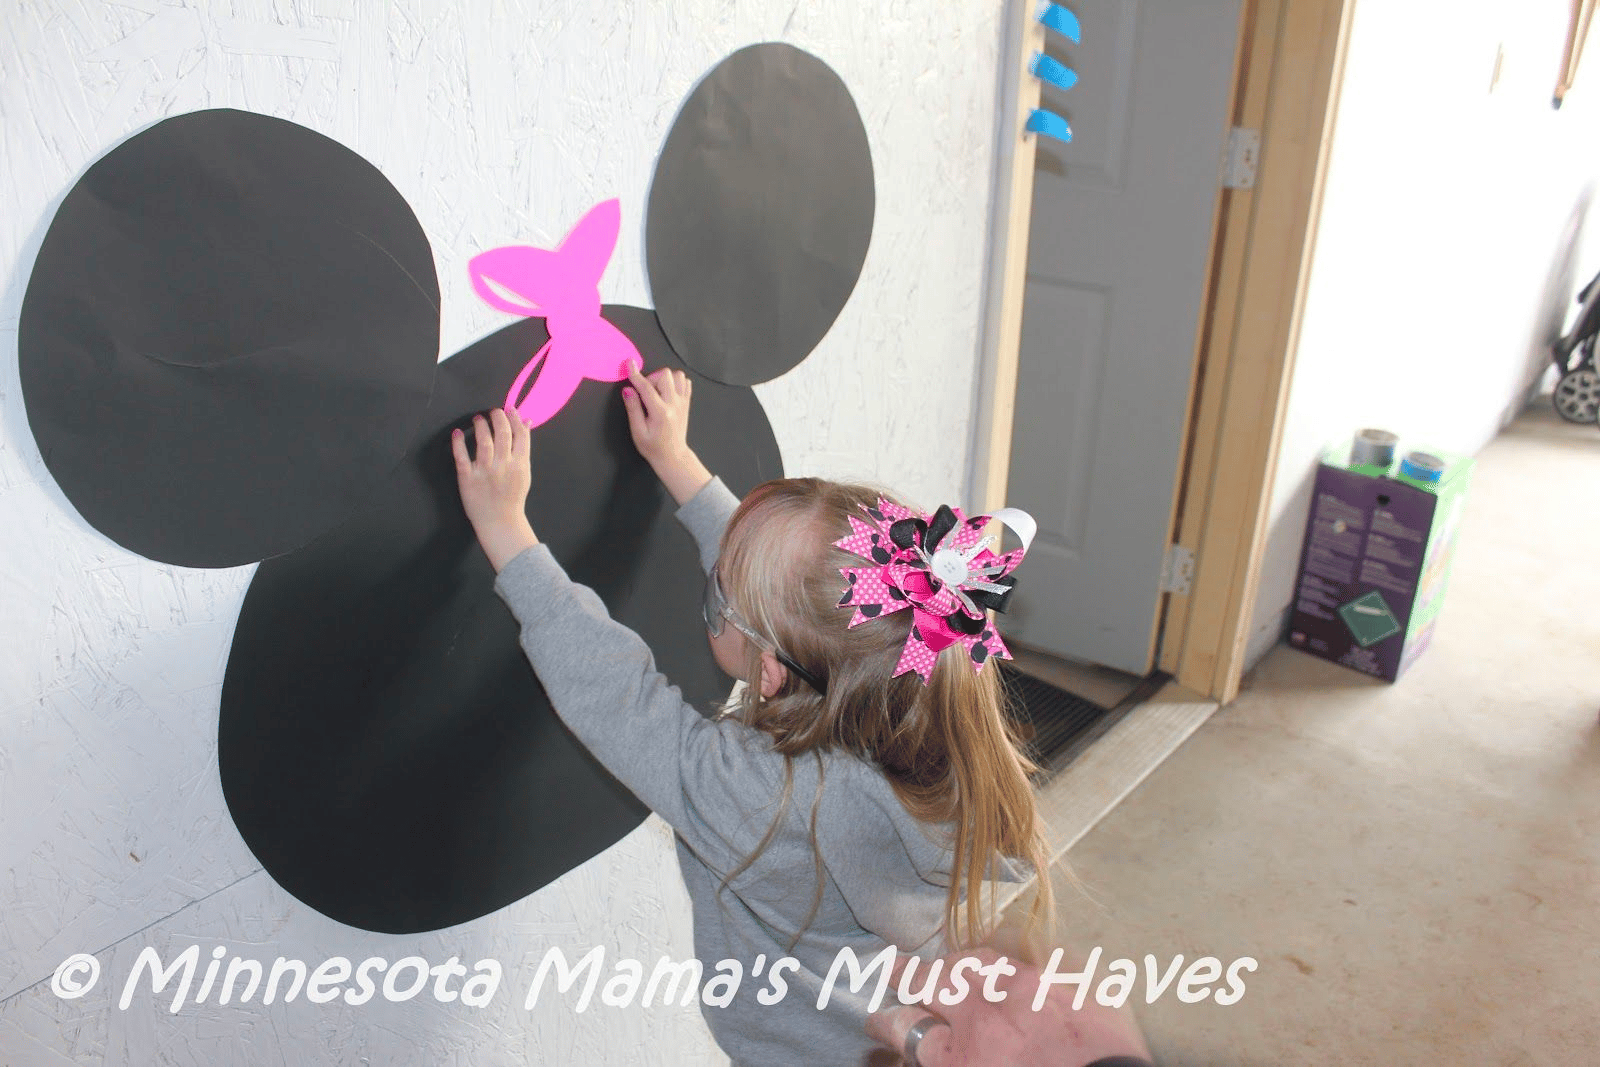 Minnie-mouse-themed birthday party game “Pin the Bow on Minnie